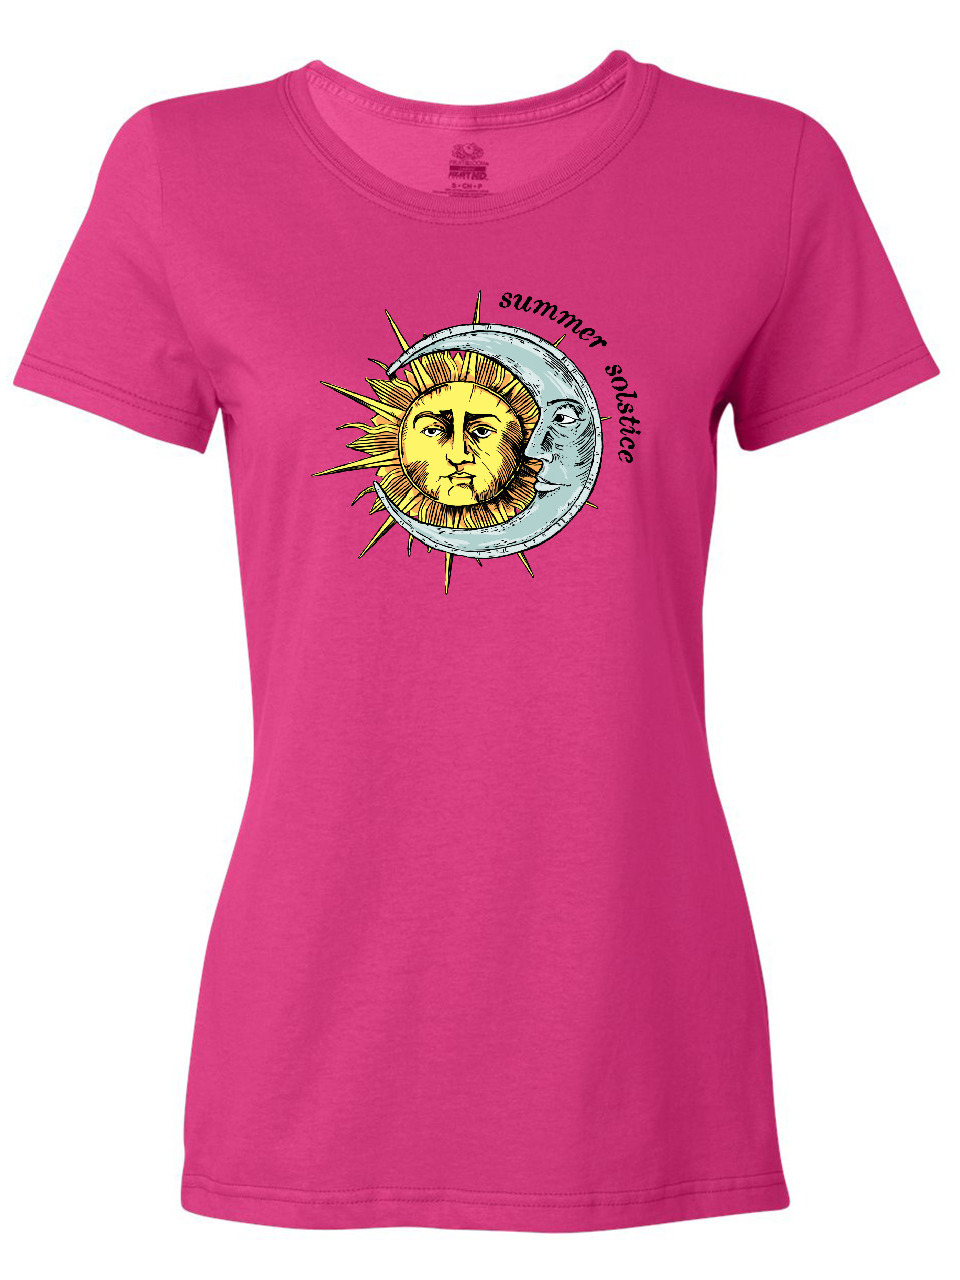 Inktastic Summer Solstice Sun and Moon Women's T-Shirt - image 1 of 4